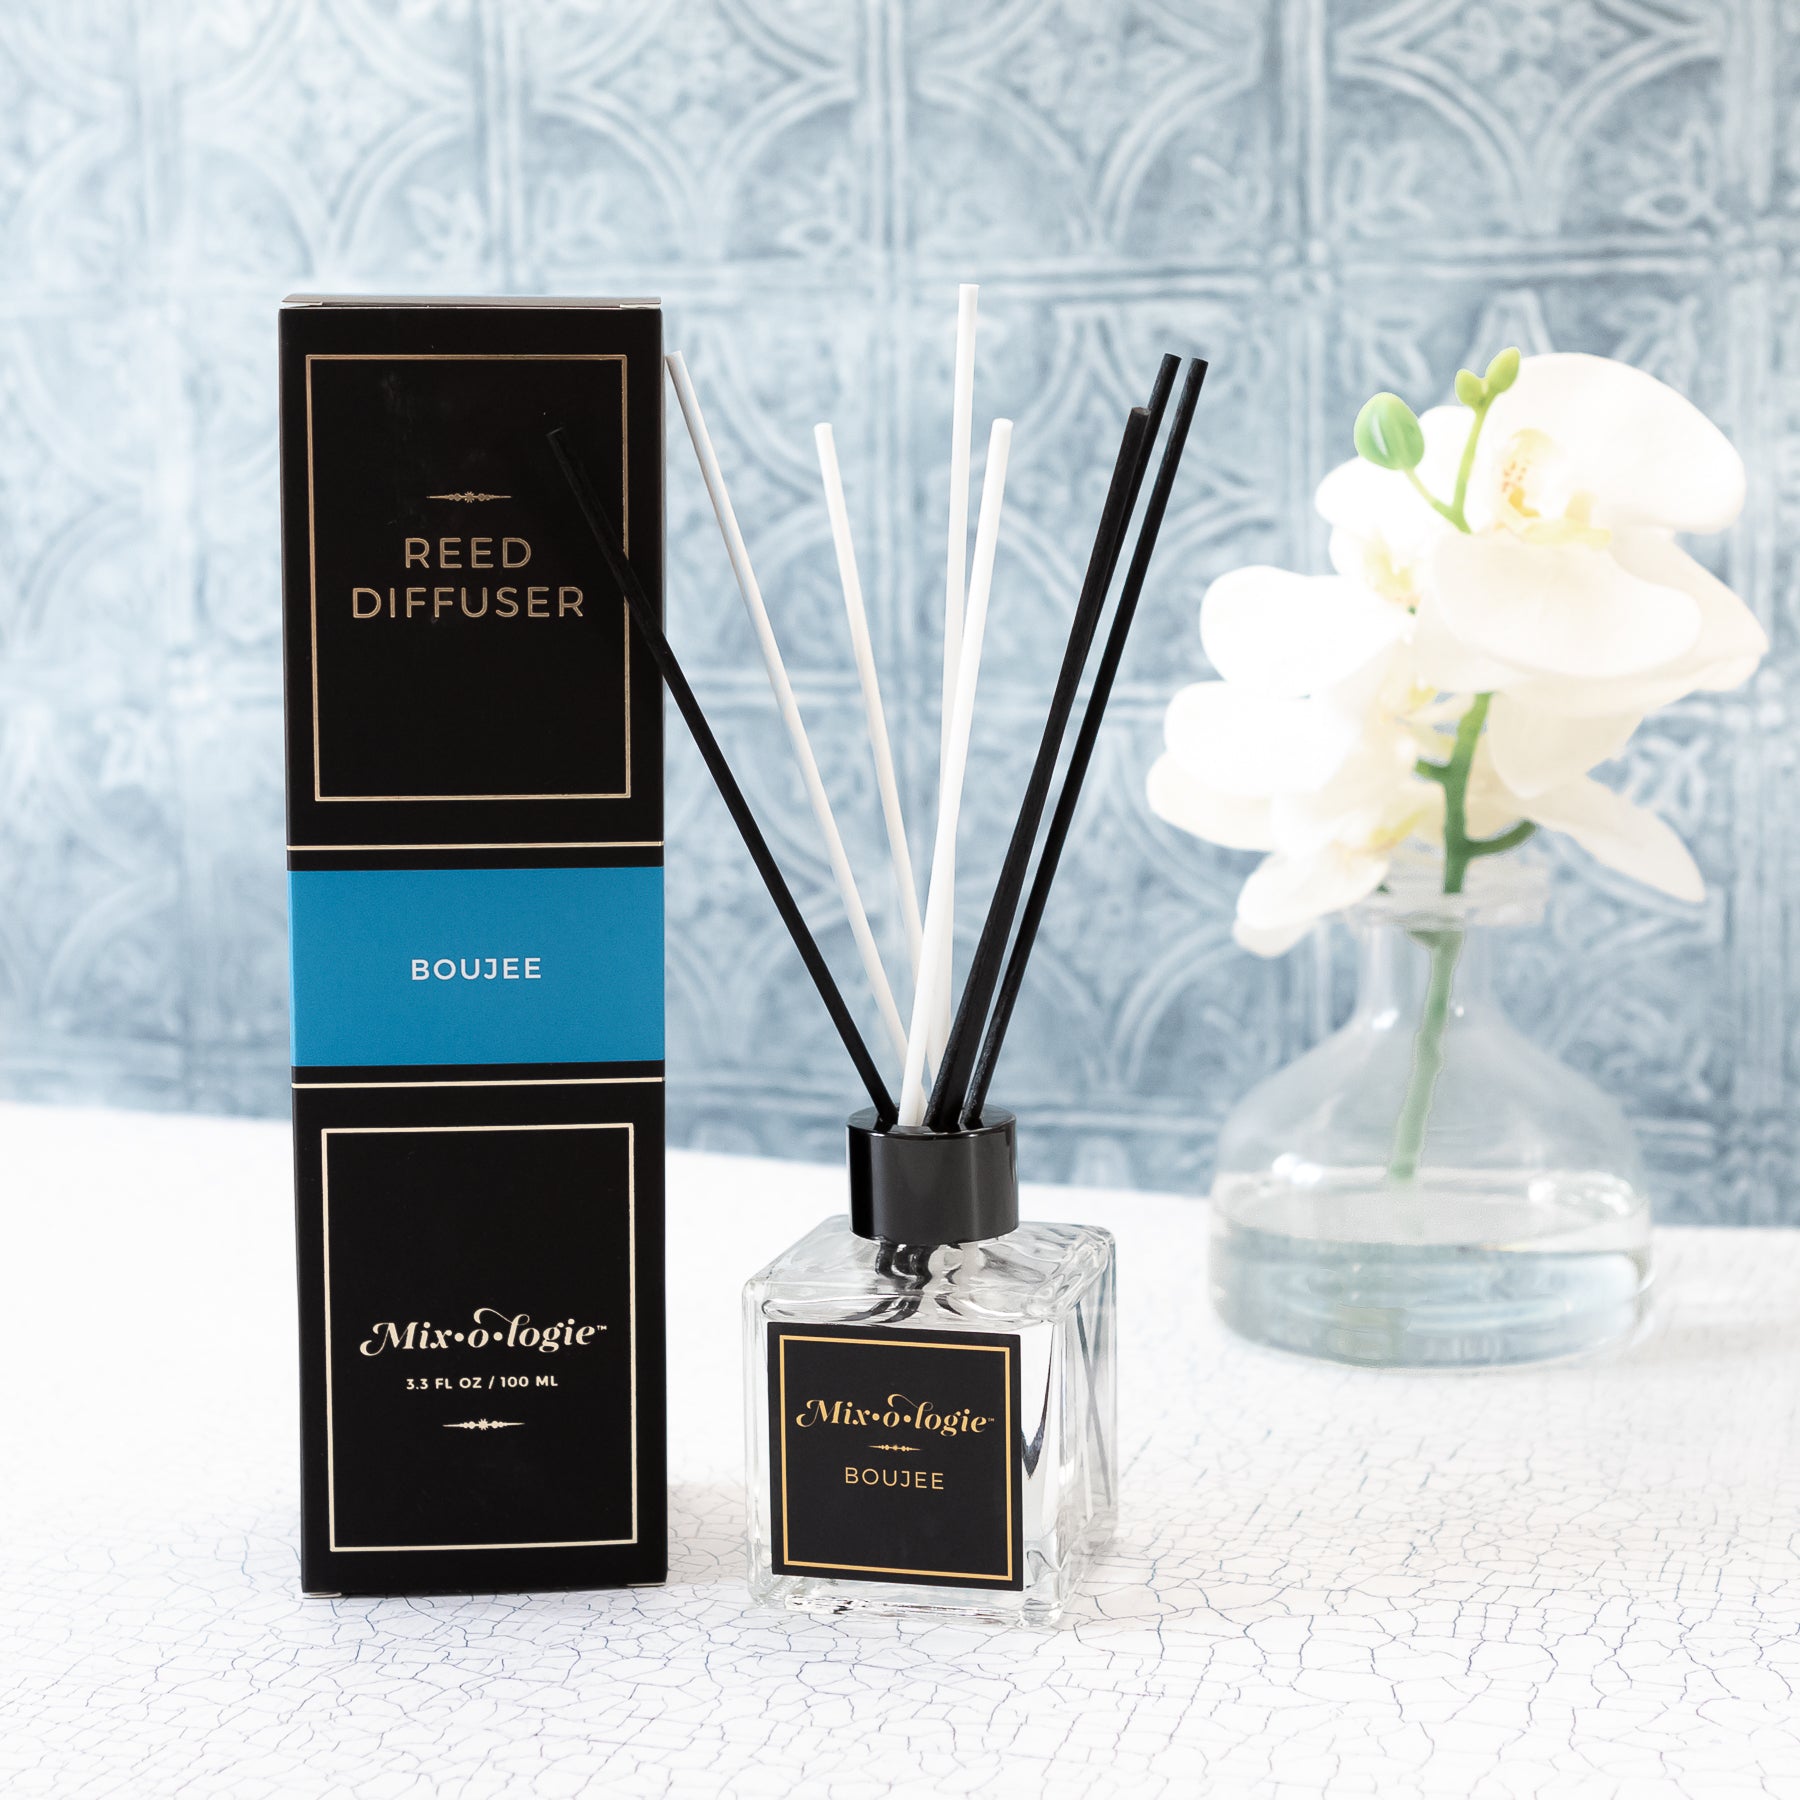 Boujee Reed Diffuser is a clear square glass container with black label that says Mixologie – Boujee. Has a black top and 4 white & 4 black reed sticks coming out of top, is 3.3 fl oz or 100 mL of clear scented liquid. Black rectangle package box with blue label. Box and diffuser are pictured on white countertop with clear vase and white flowers